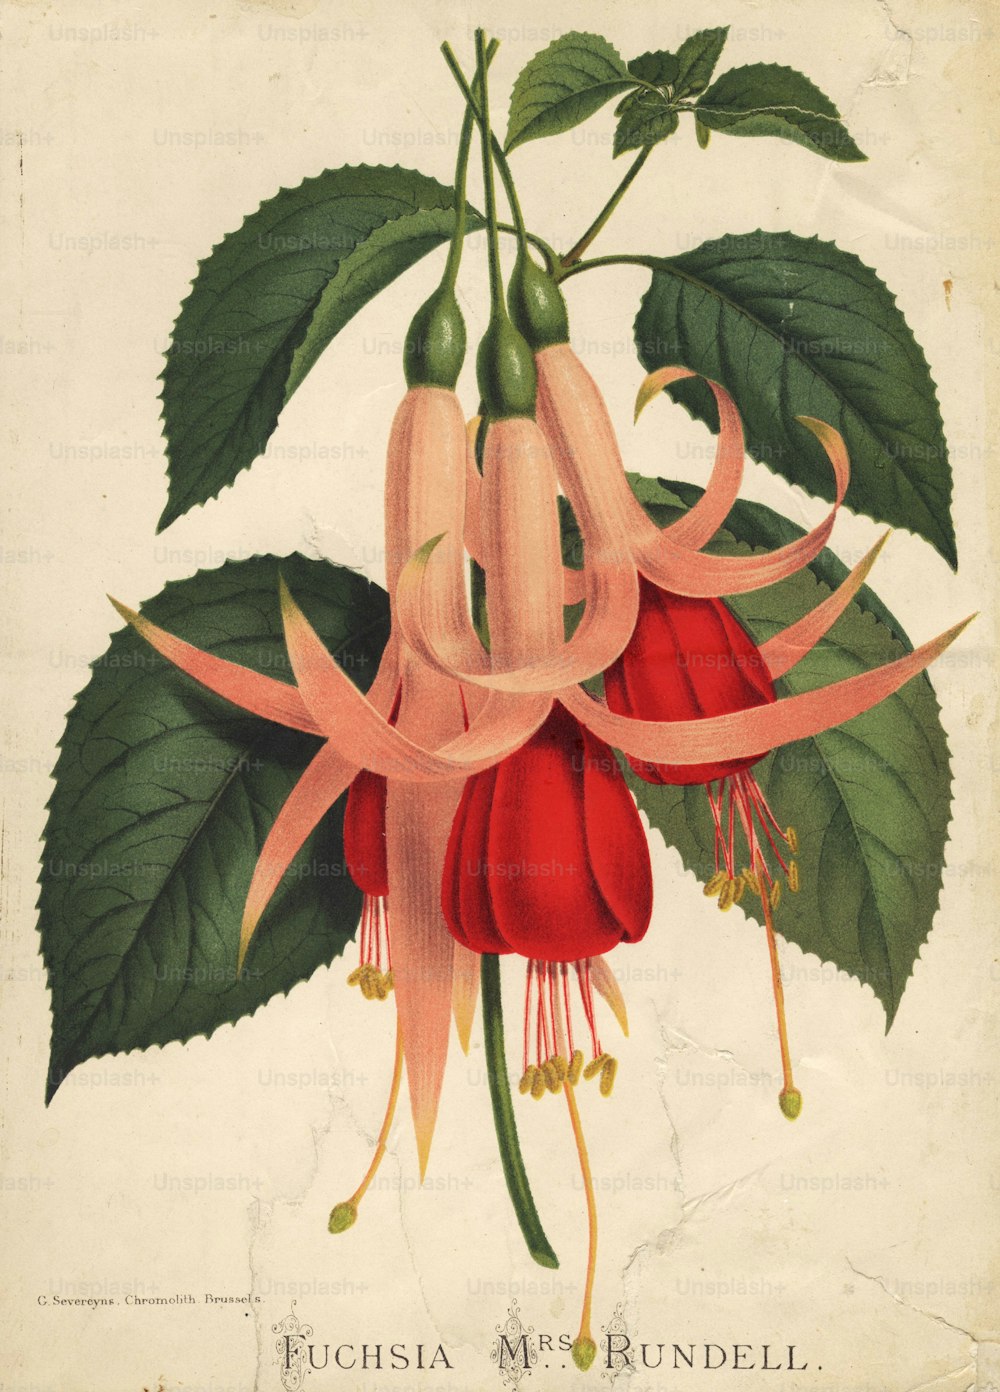 circa 1880:  A fuchsia, Mrs Rundell, with orange calyx and red petals.  (Photo by Edward Gooch Collection/Getty Images)